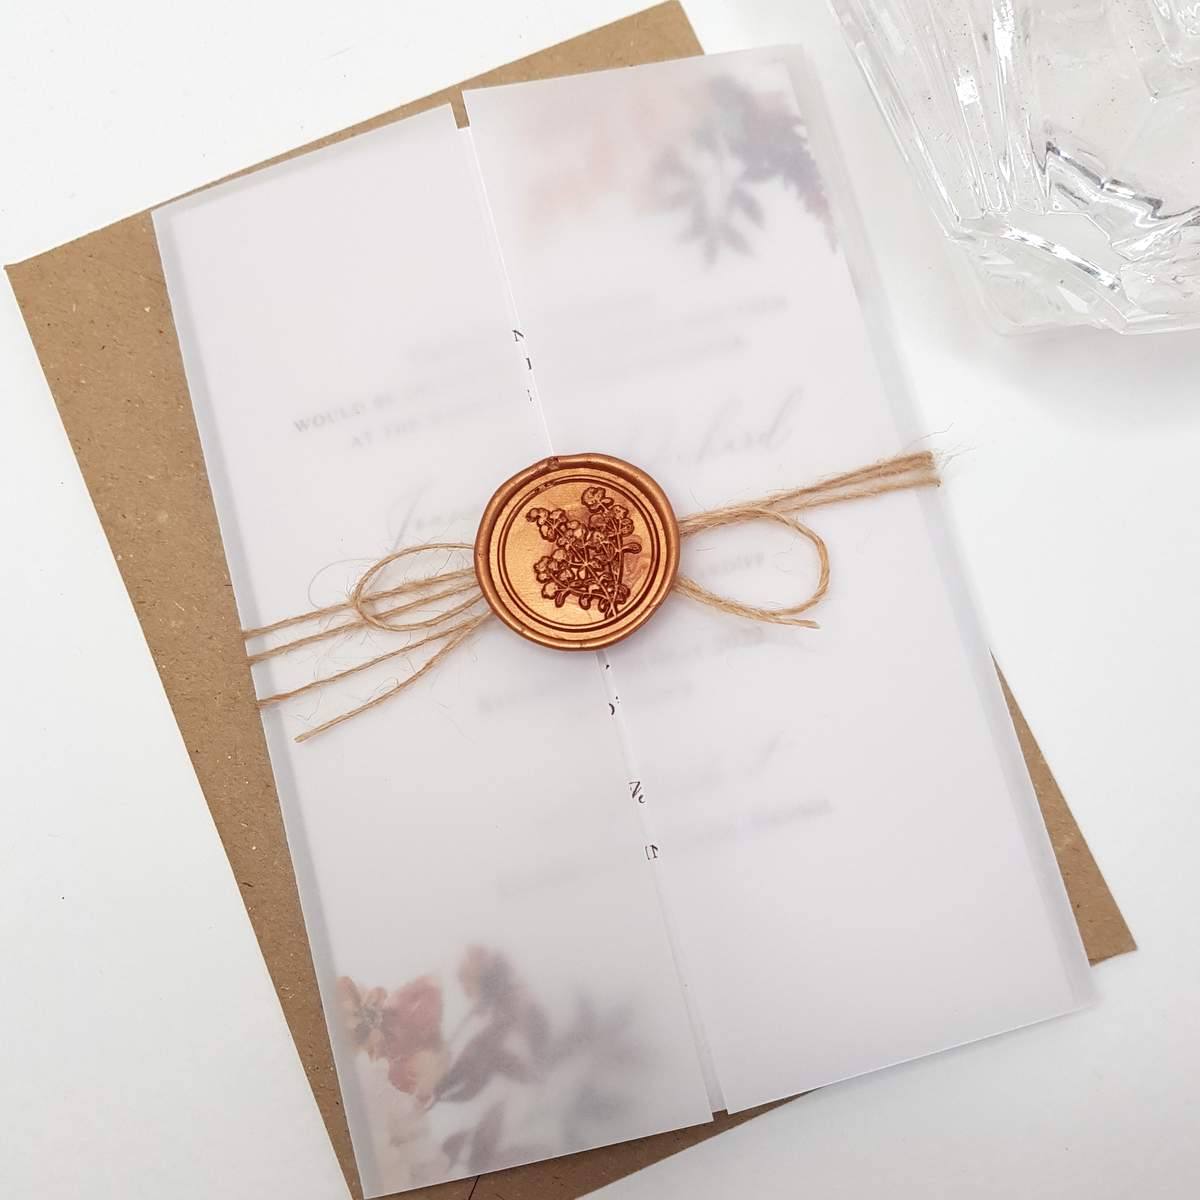 autumn design wedding invitation with a vellum jacket, jute twine and a copper wax seal